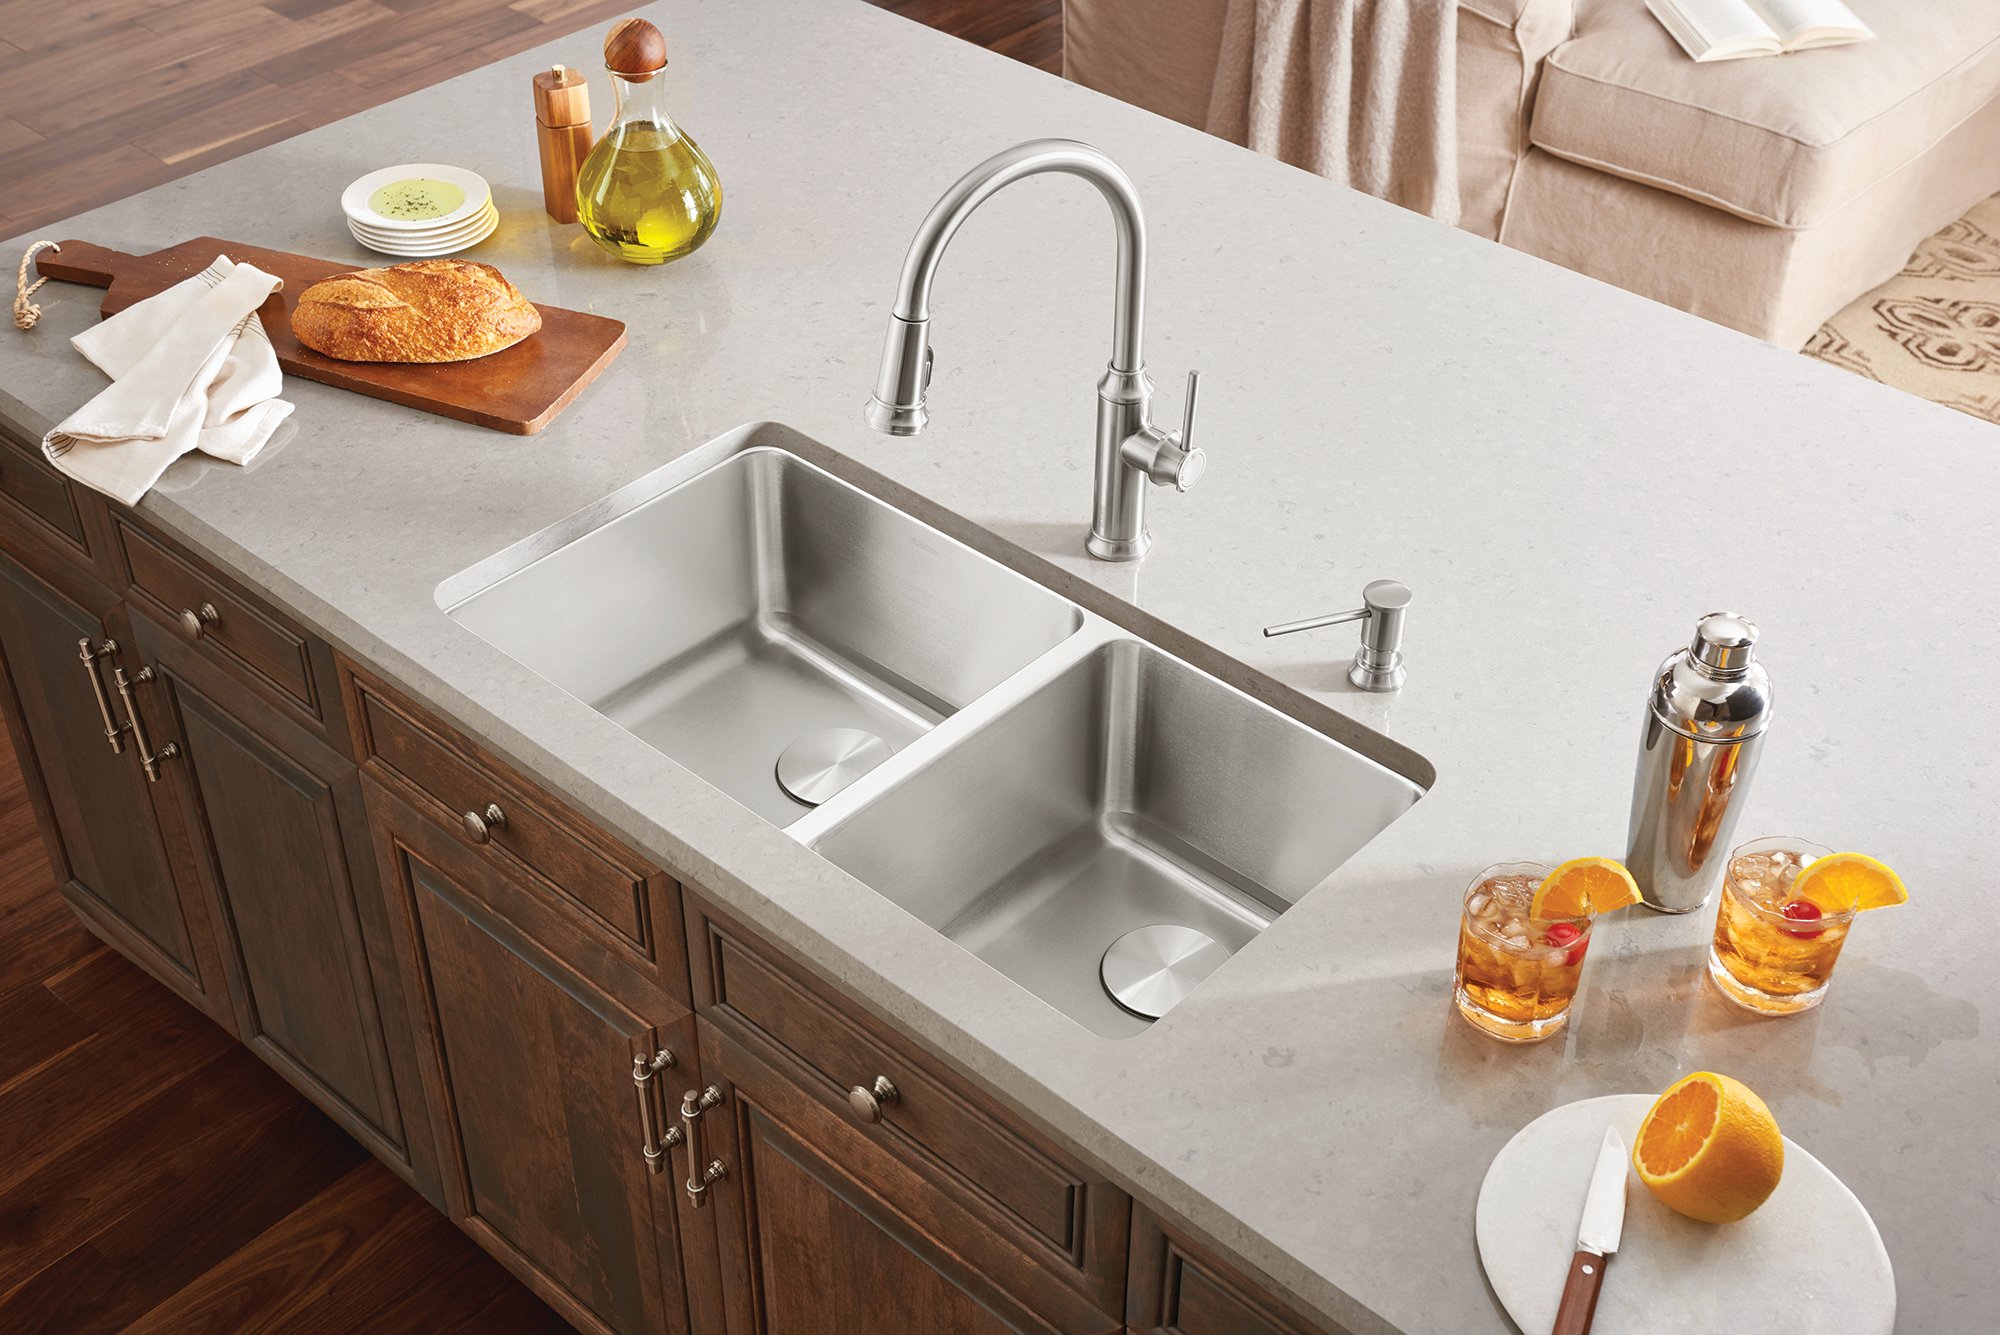 4 Things to consider when choosing a kitchen faucet